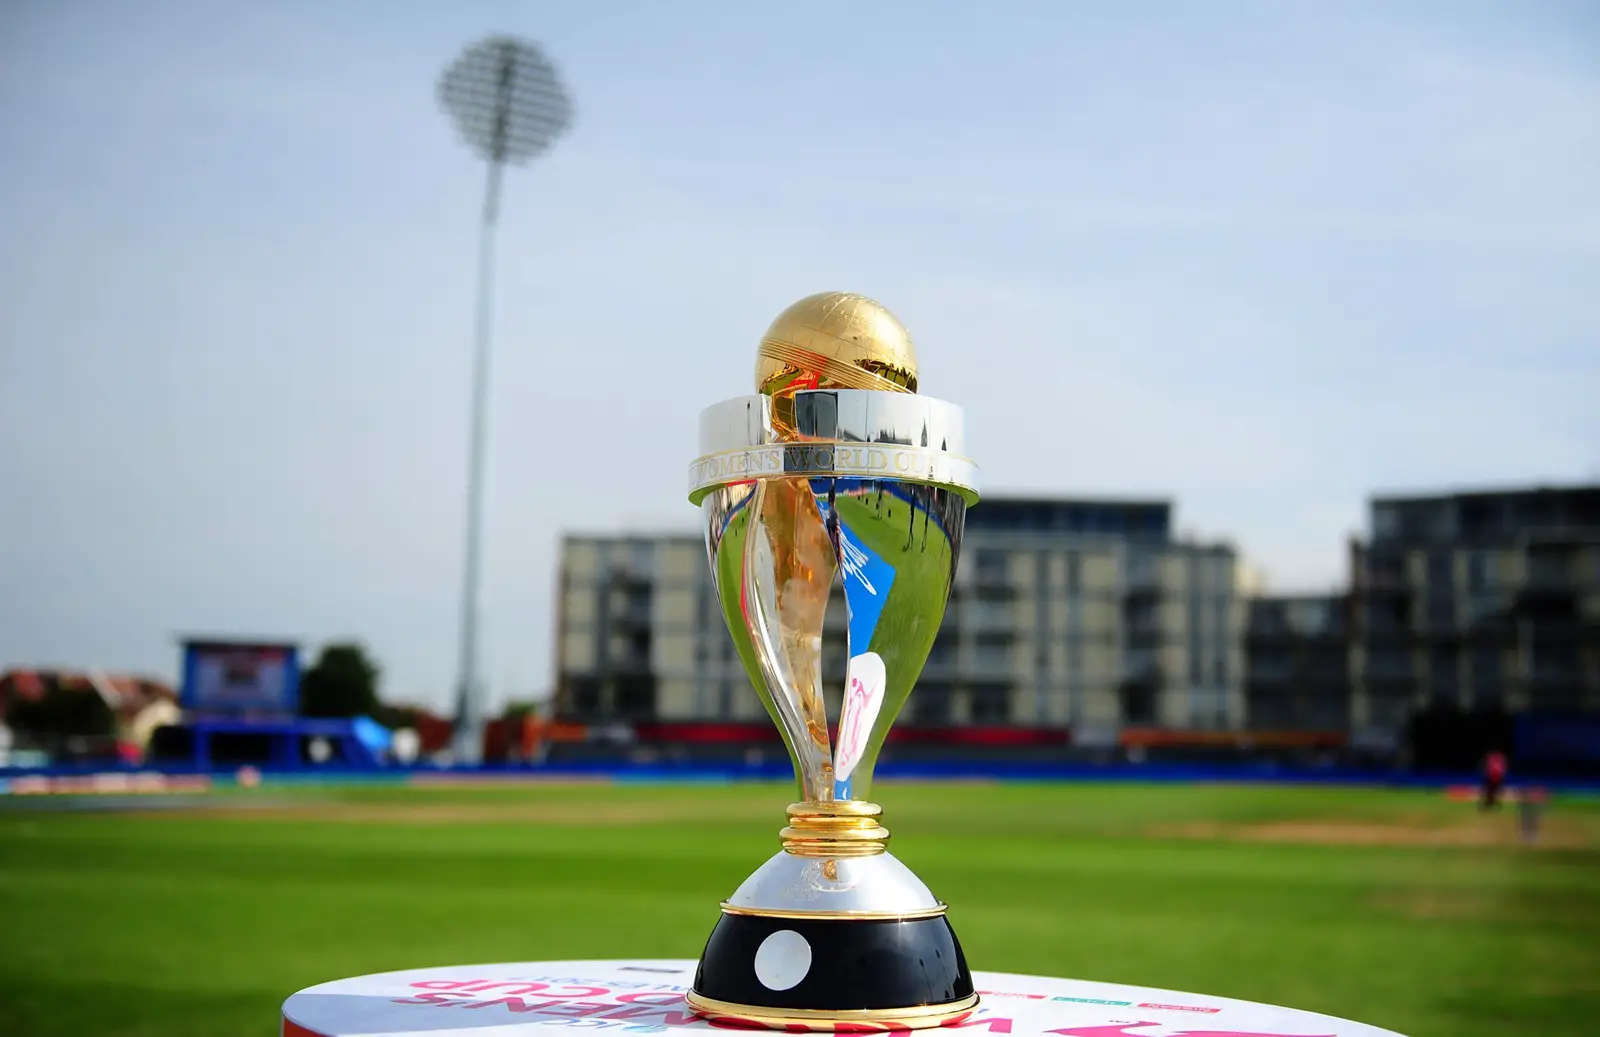 ICC Women's T20 World Cup 2021 postponed till February-March 2022. Image courtesy: Cricket Australia